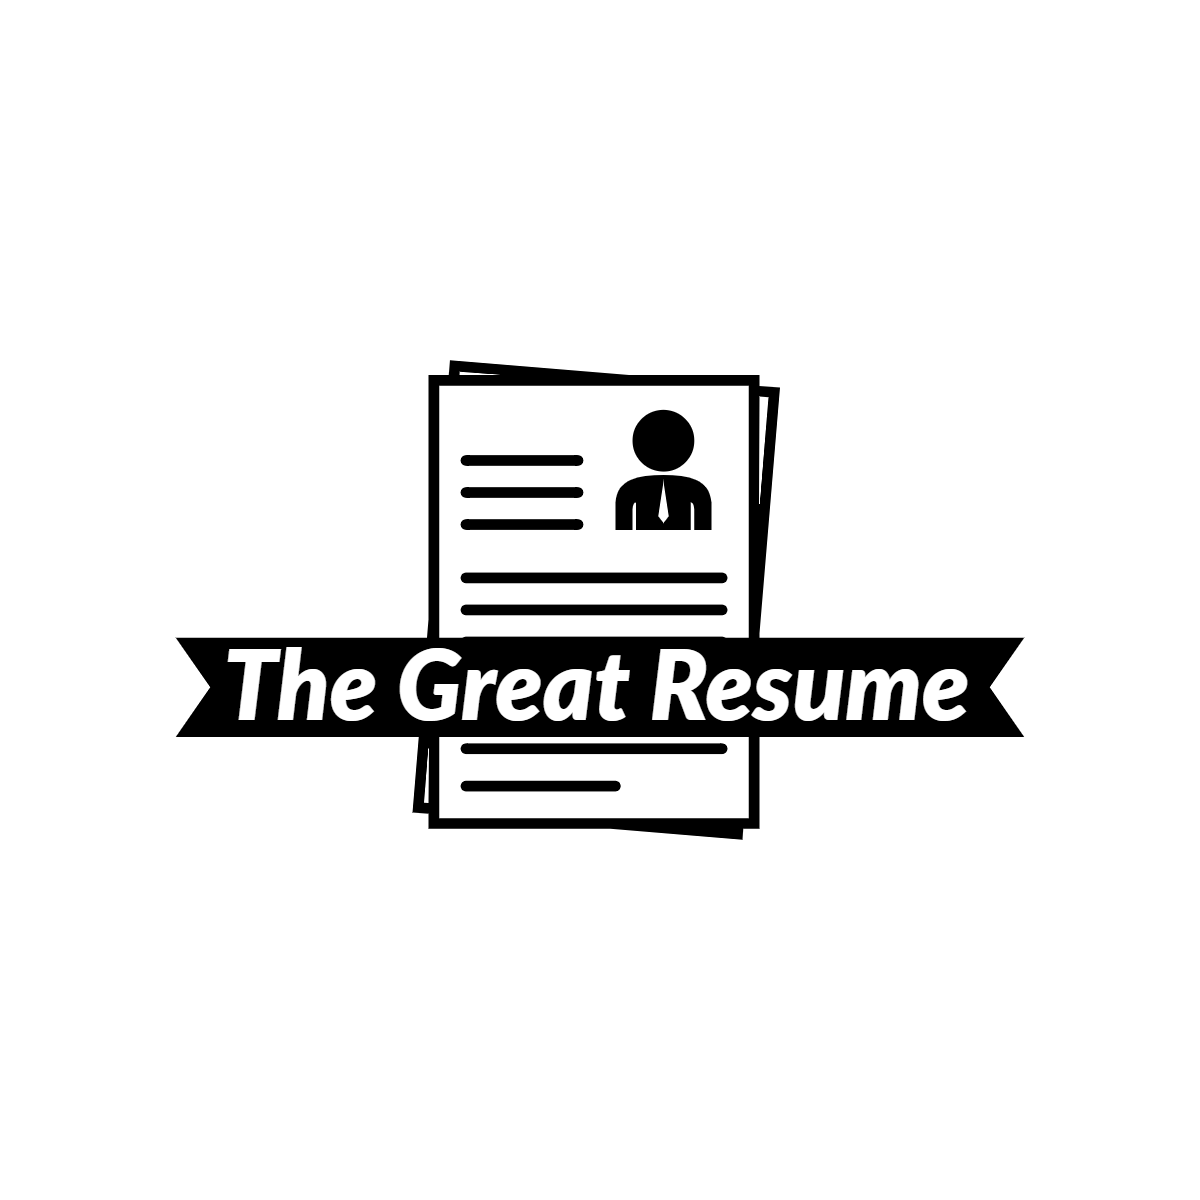 The Great Resume Logo